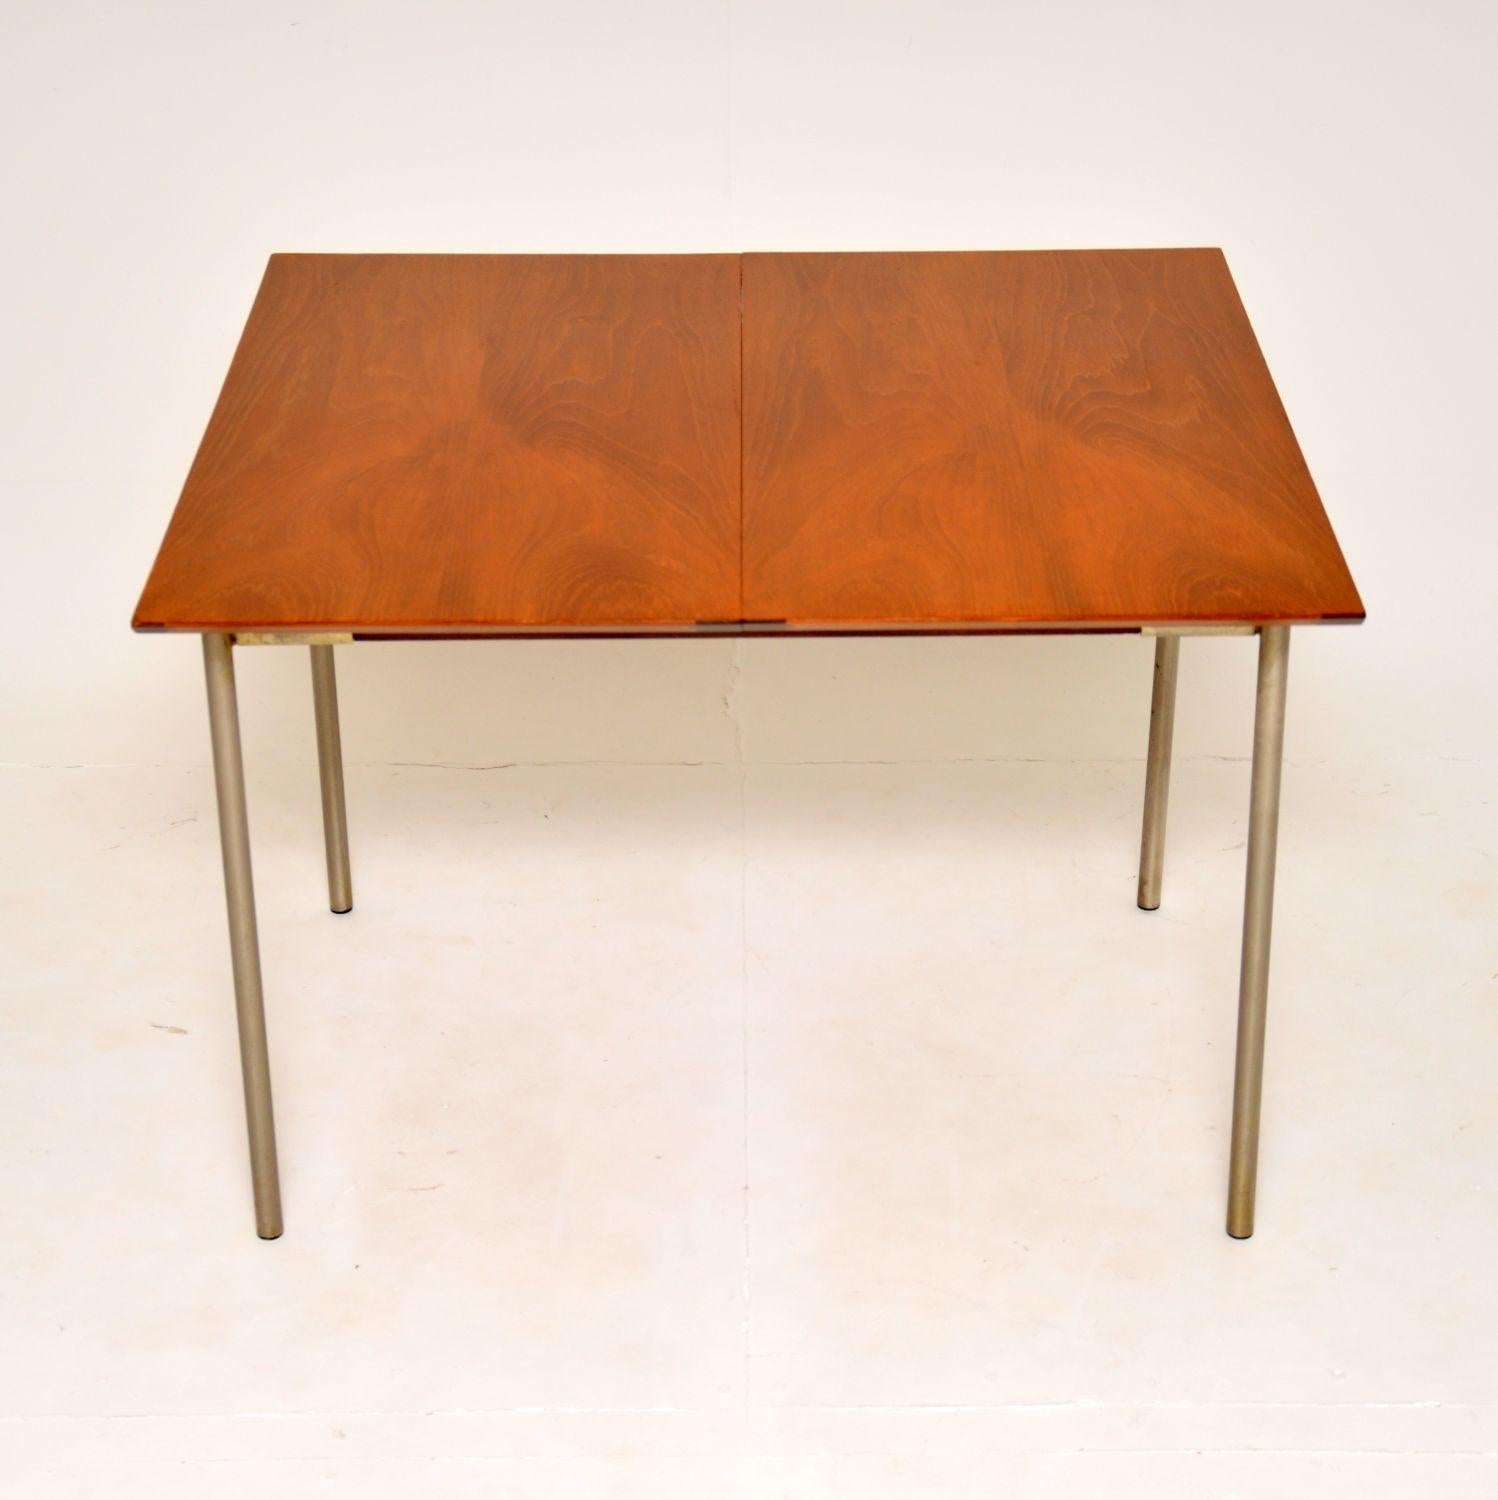 20th Century 1950's Vintage Stag S Range Teak Dining Table & Chairs